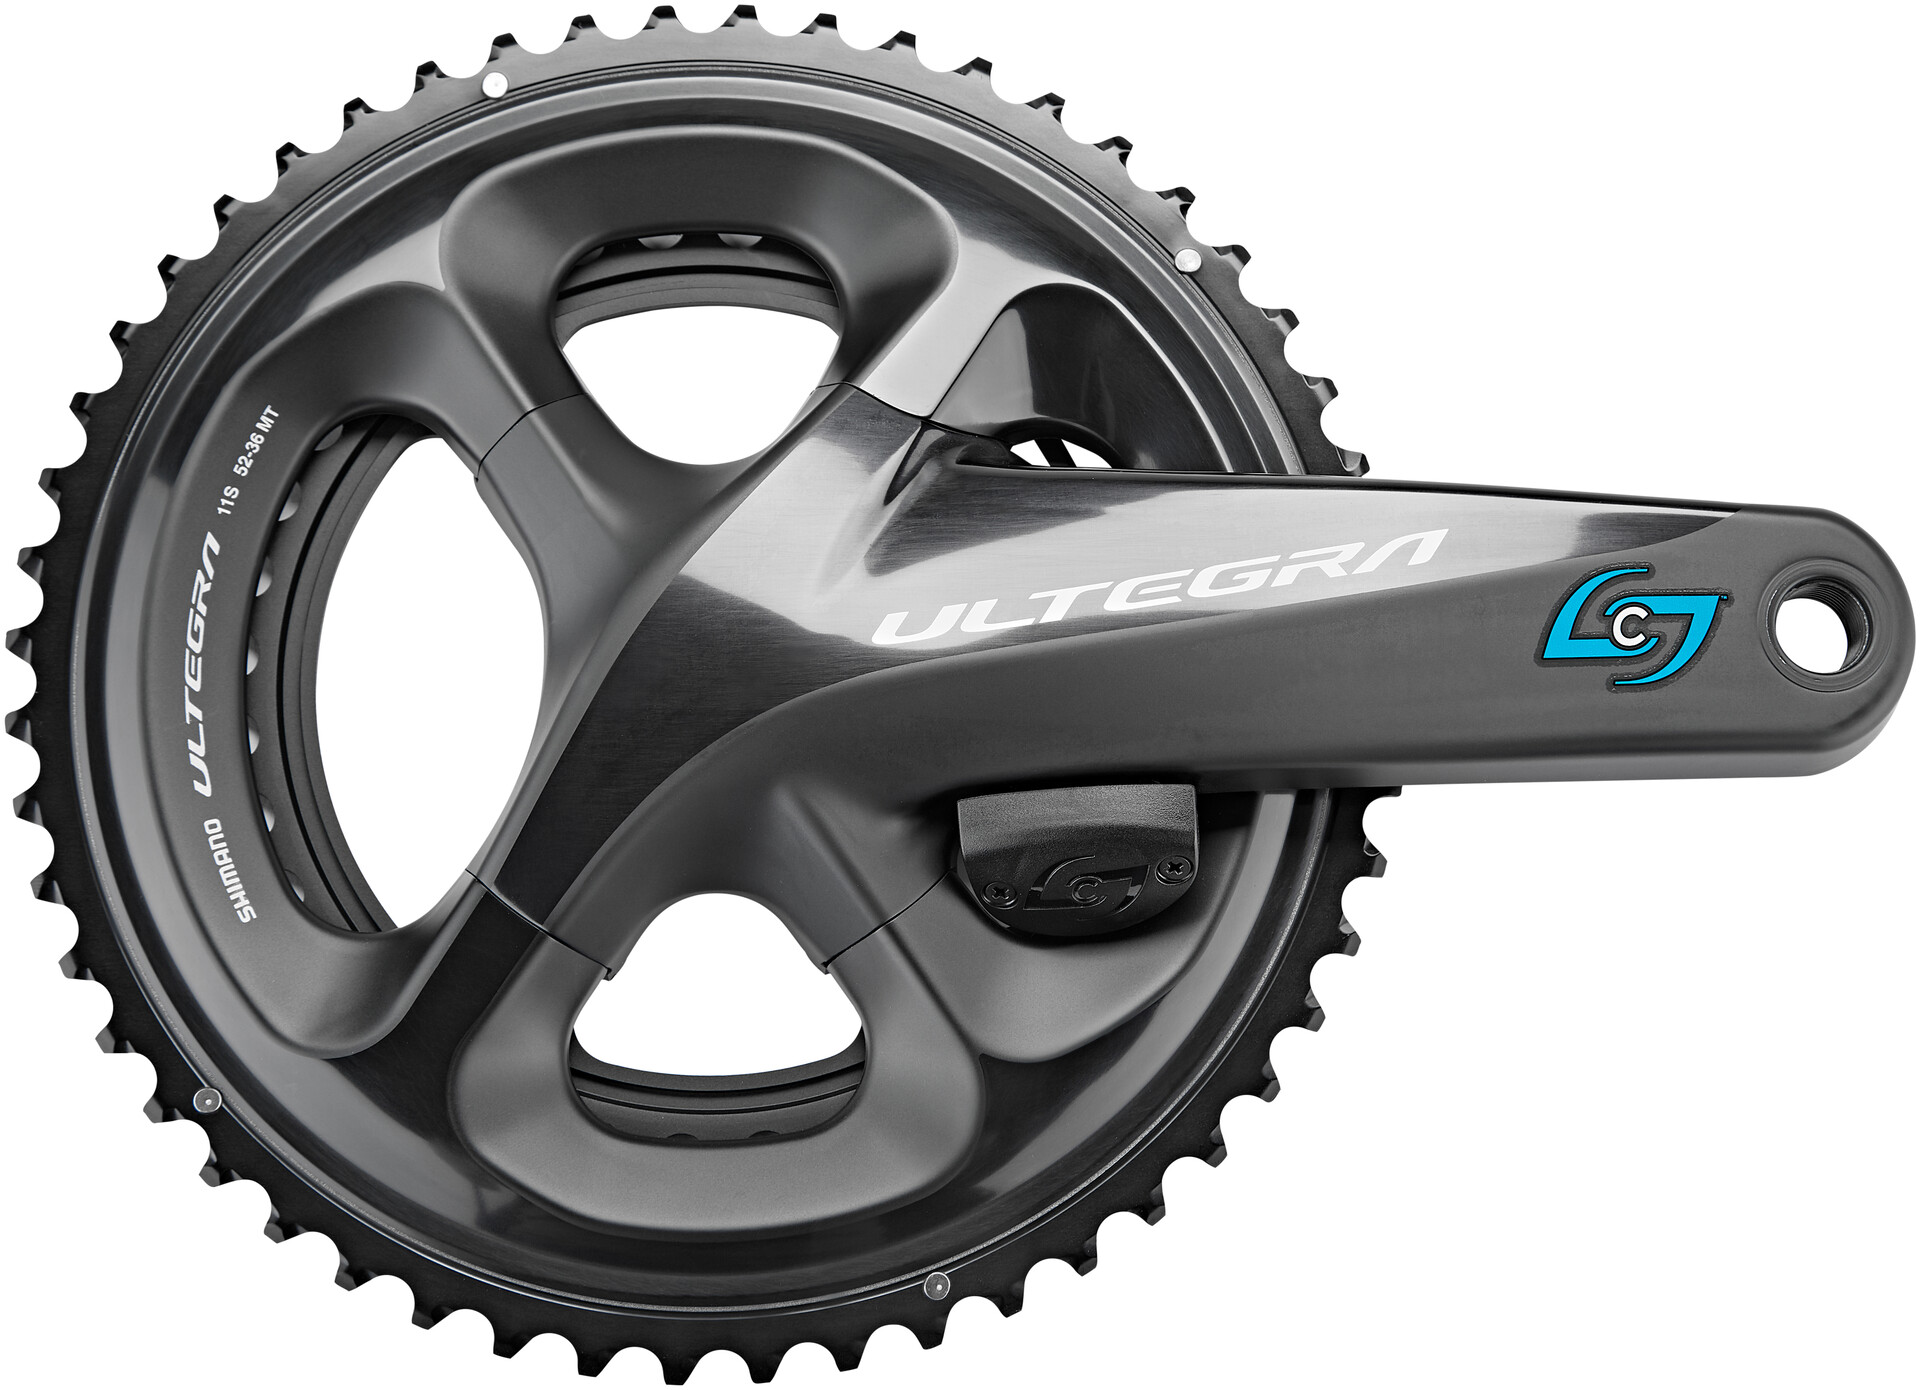 Stages Power Meter Ultegra 165mm Sale, SAVE 56%.